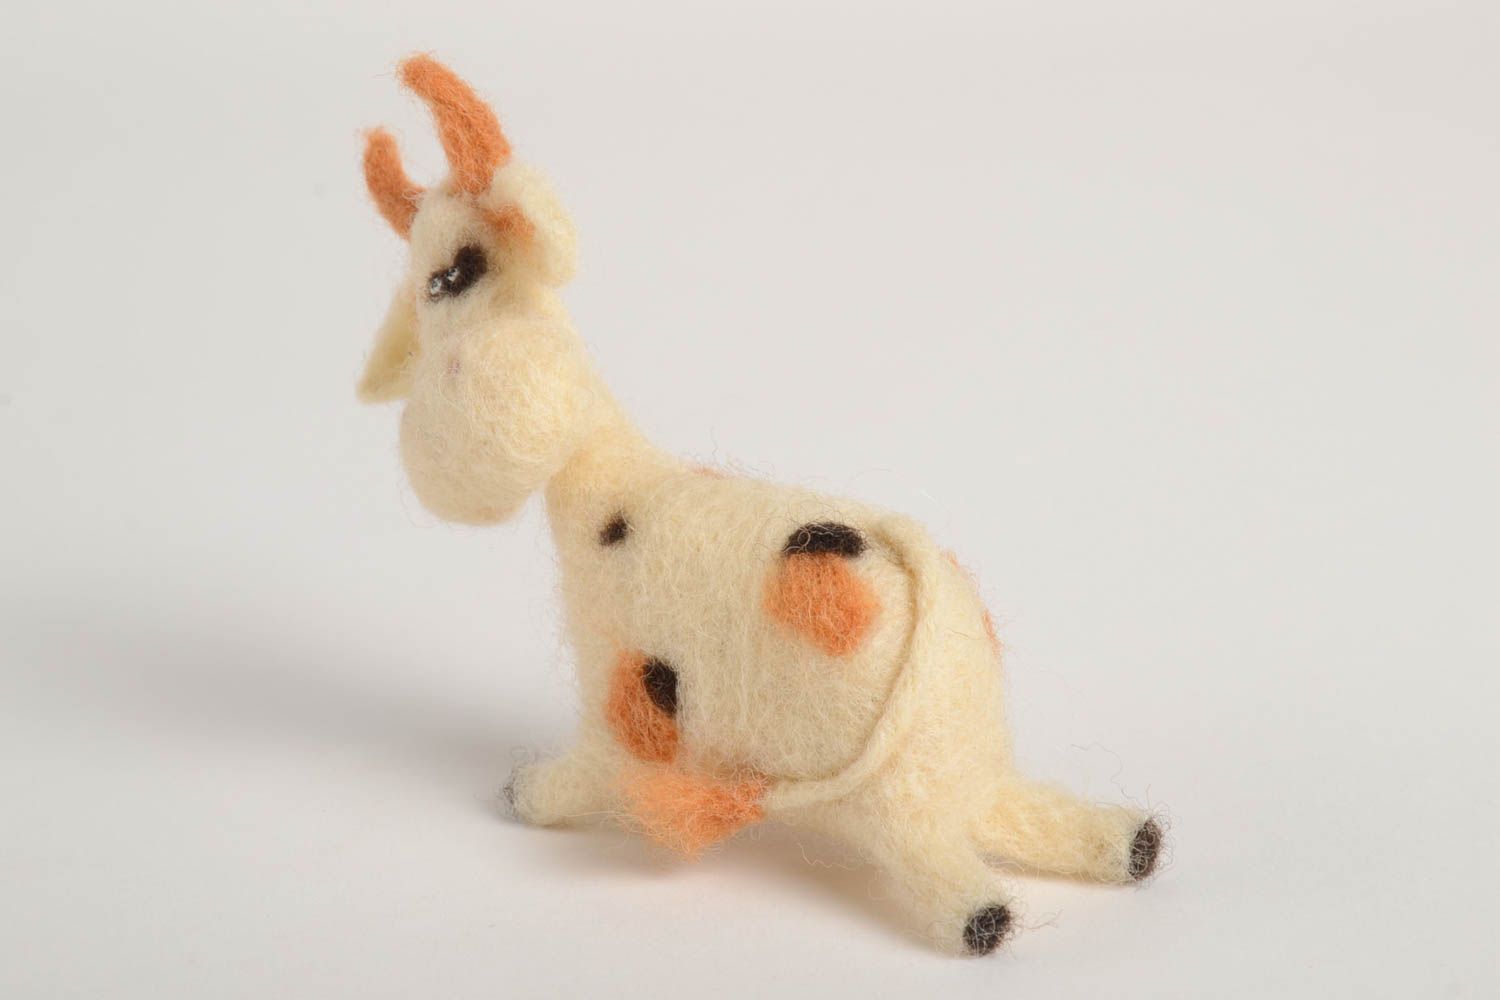 Unusual handmade soft toy best toys for kids cute childrens toys needle felting photo 4